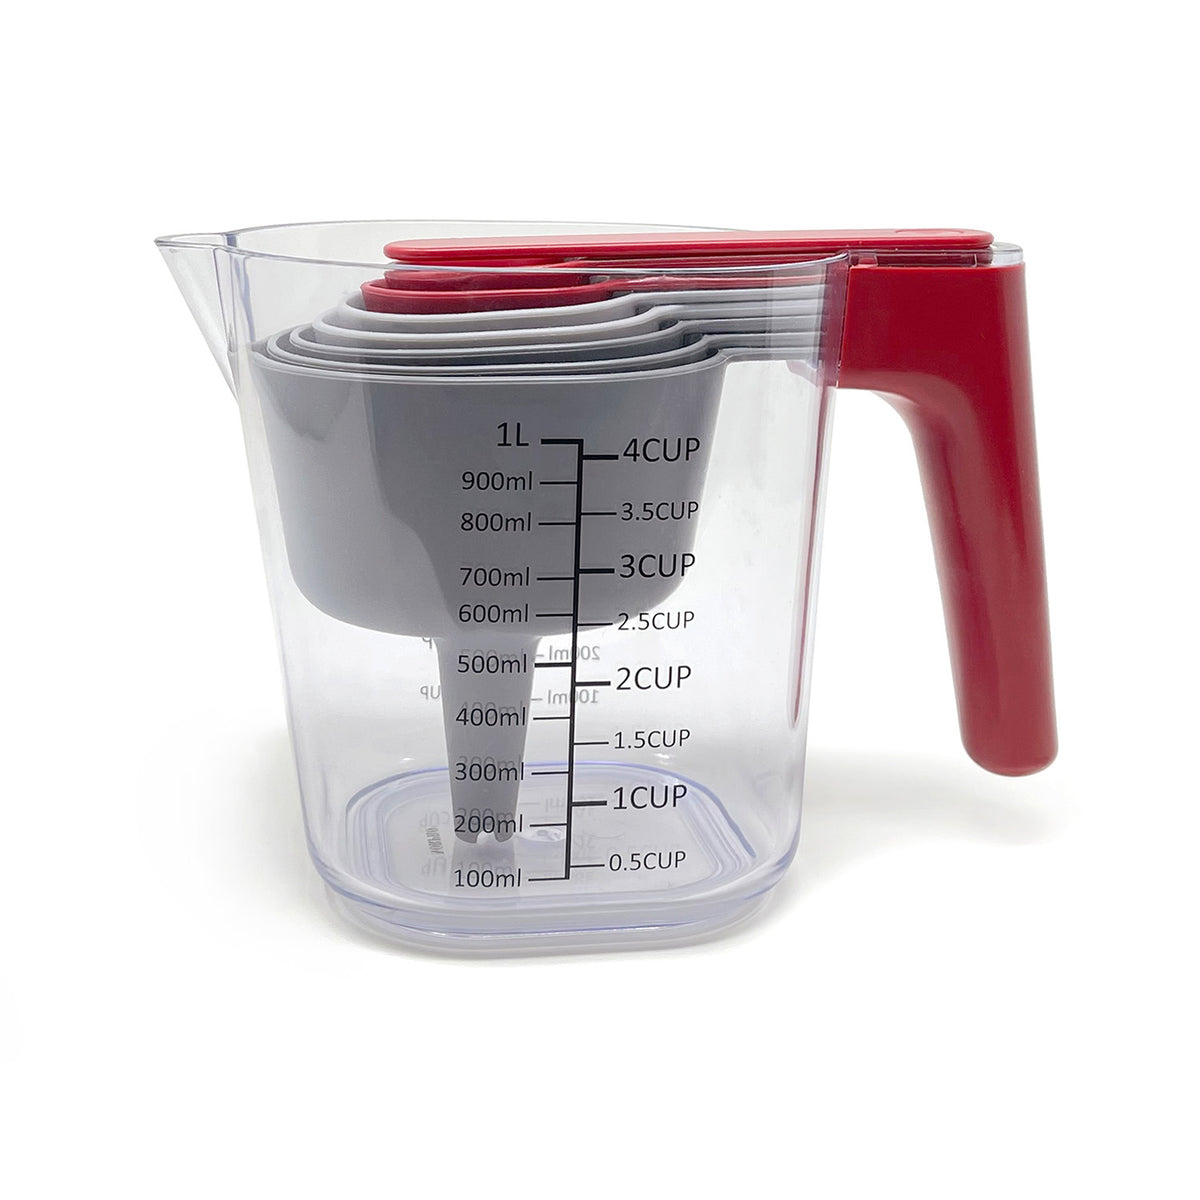  Norpro Set Stainless Steel 5 Piece Measuring Cup, One